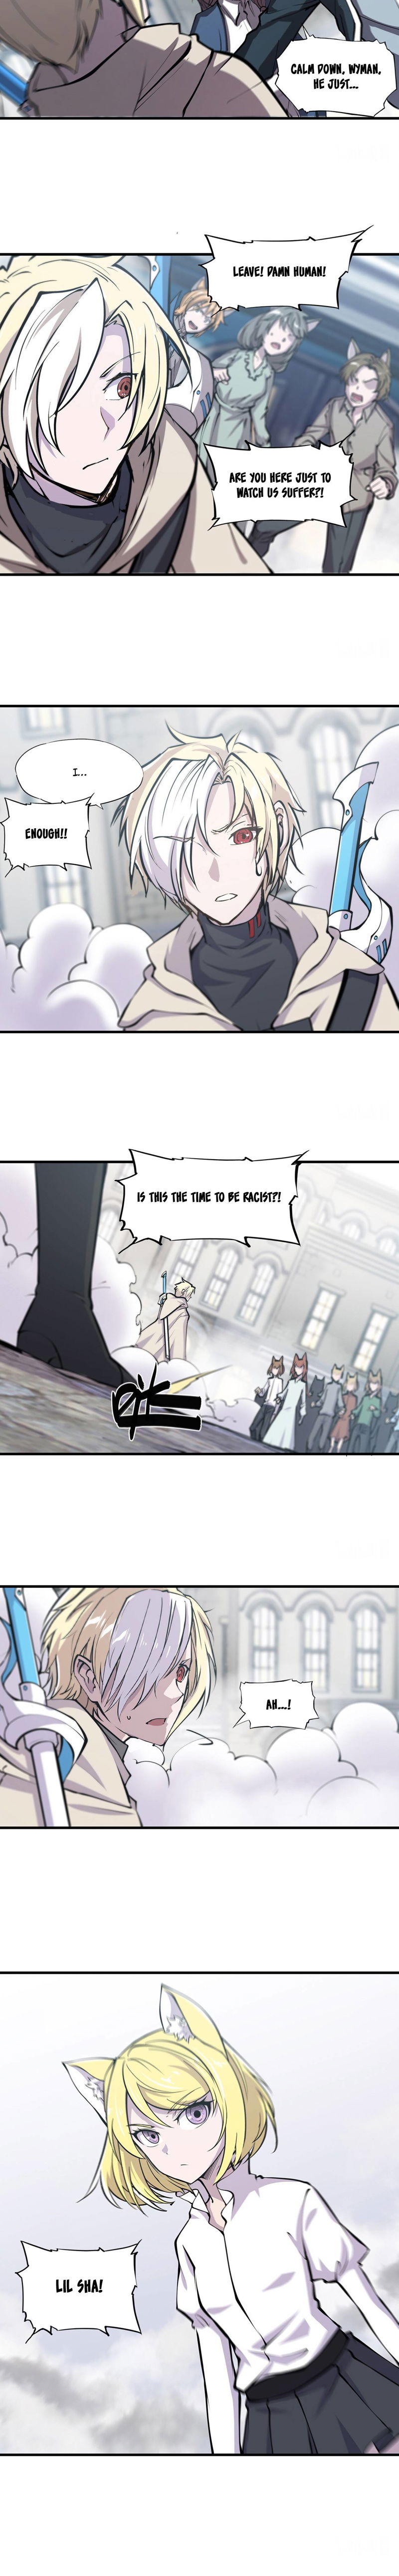 The Blood Princess and the Knight Chapter 124 page 7